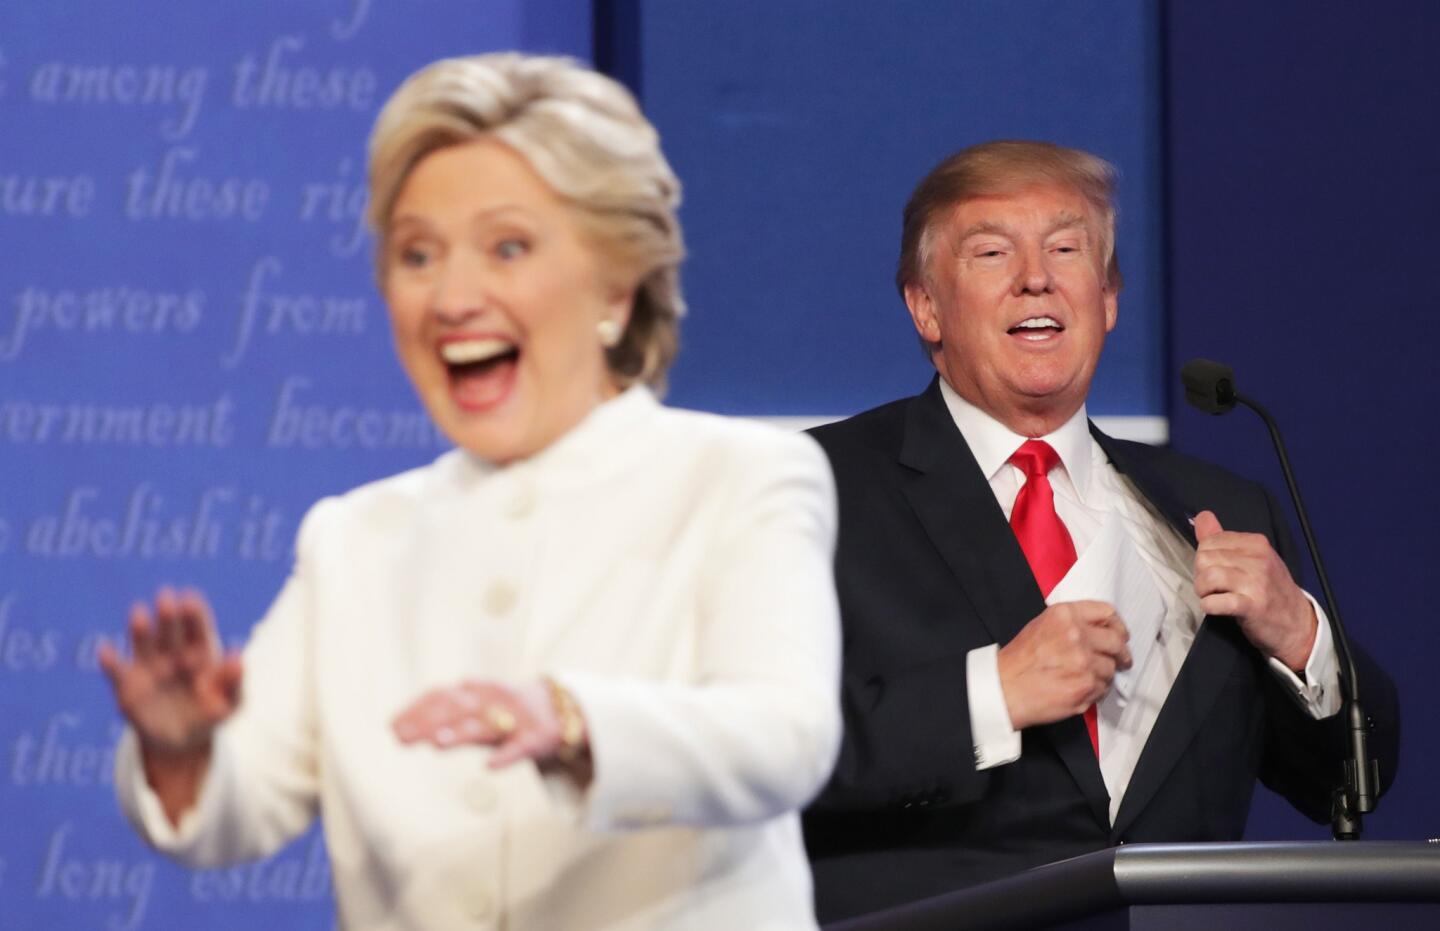 Hillary Clinton and Donald Trump after the third and final presidential debate in Las Vegas on Oct. 19, 2016.